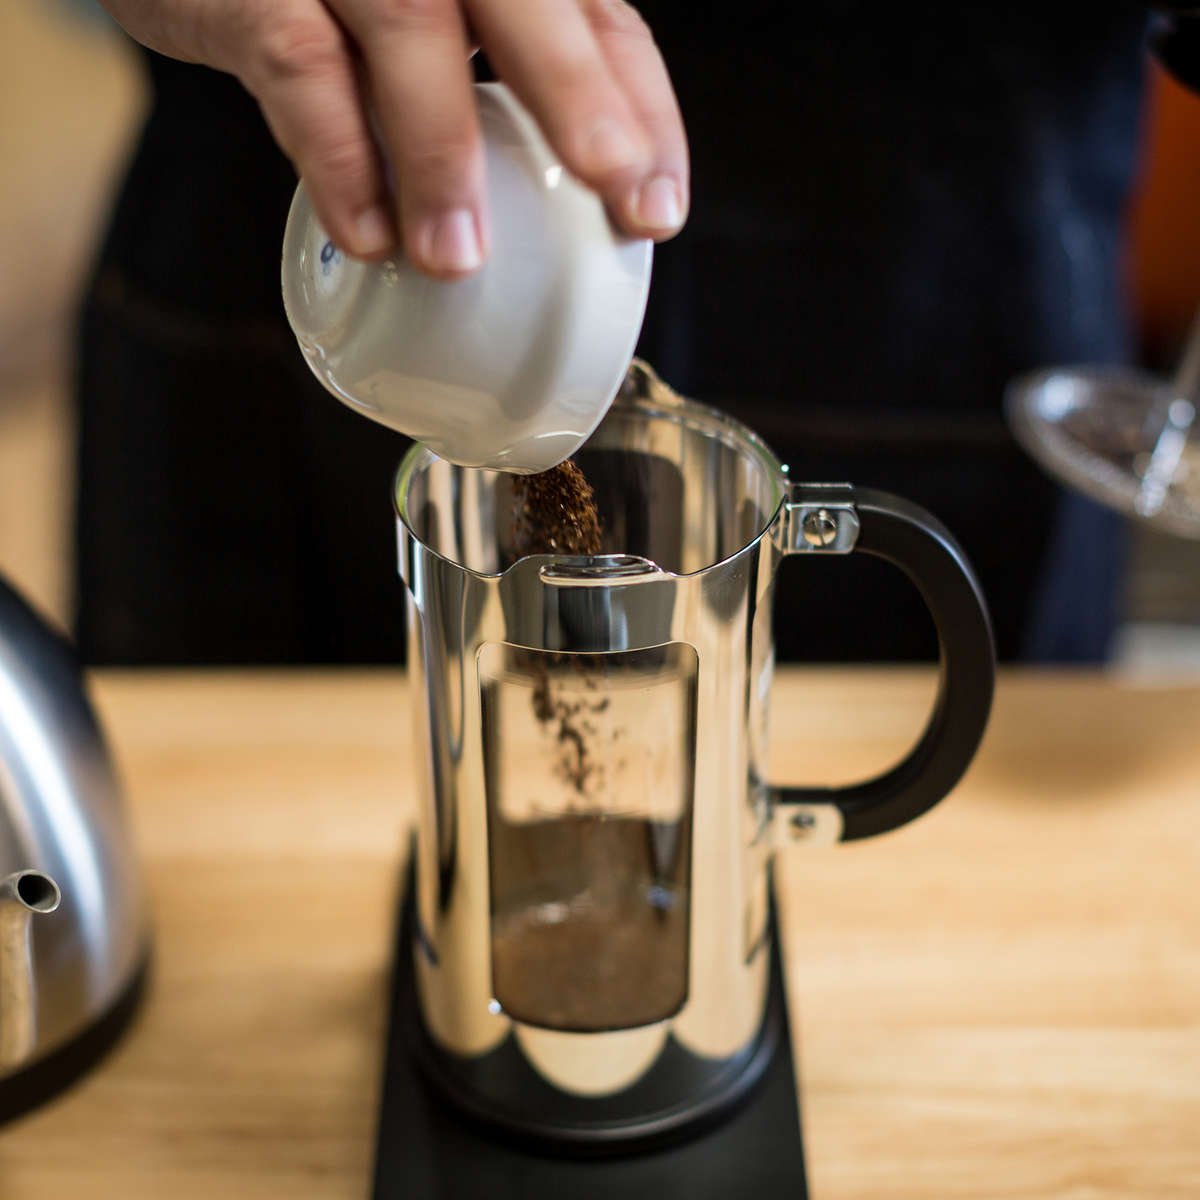 COFFEE BEING POURED INTO FRENCH PRESS